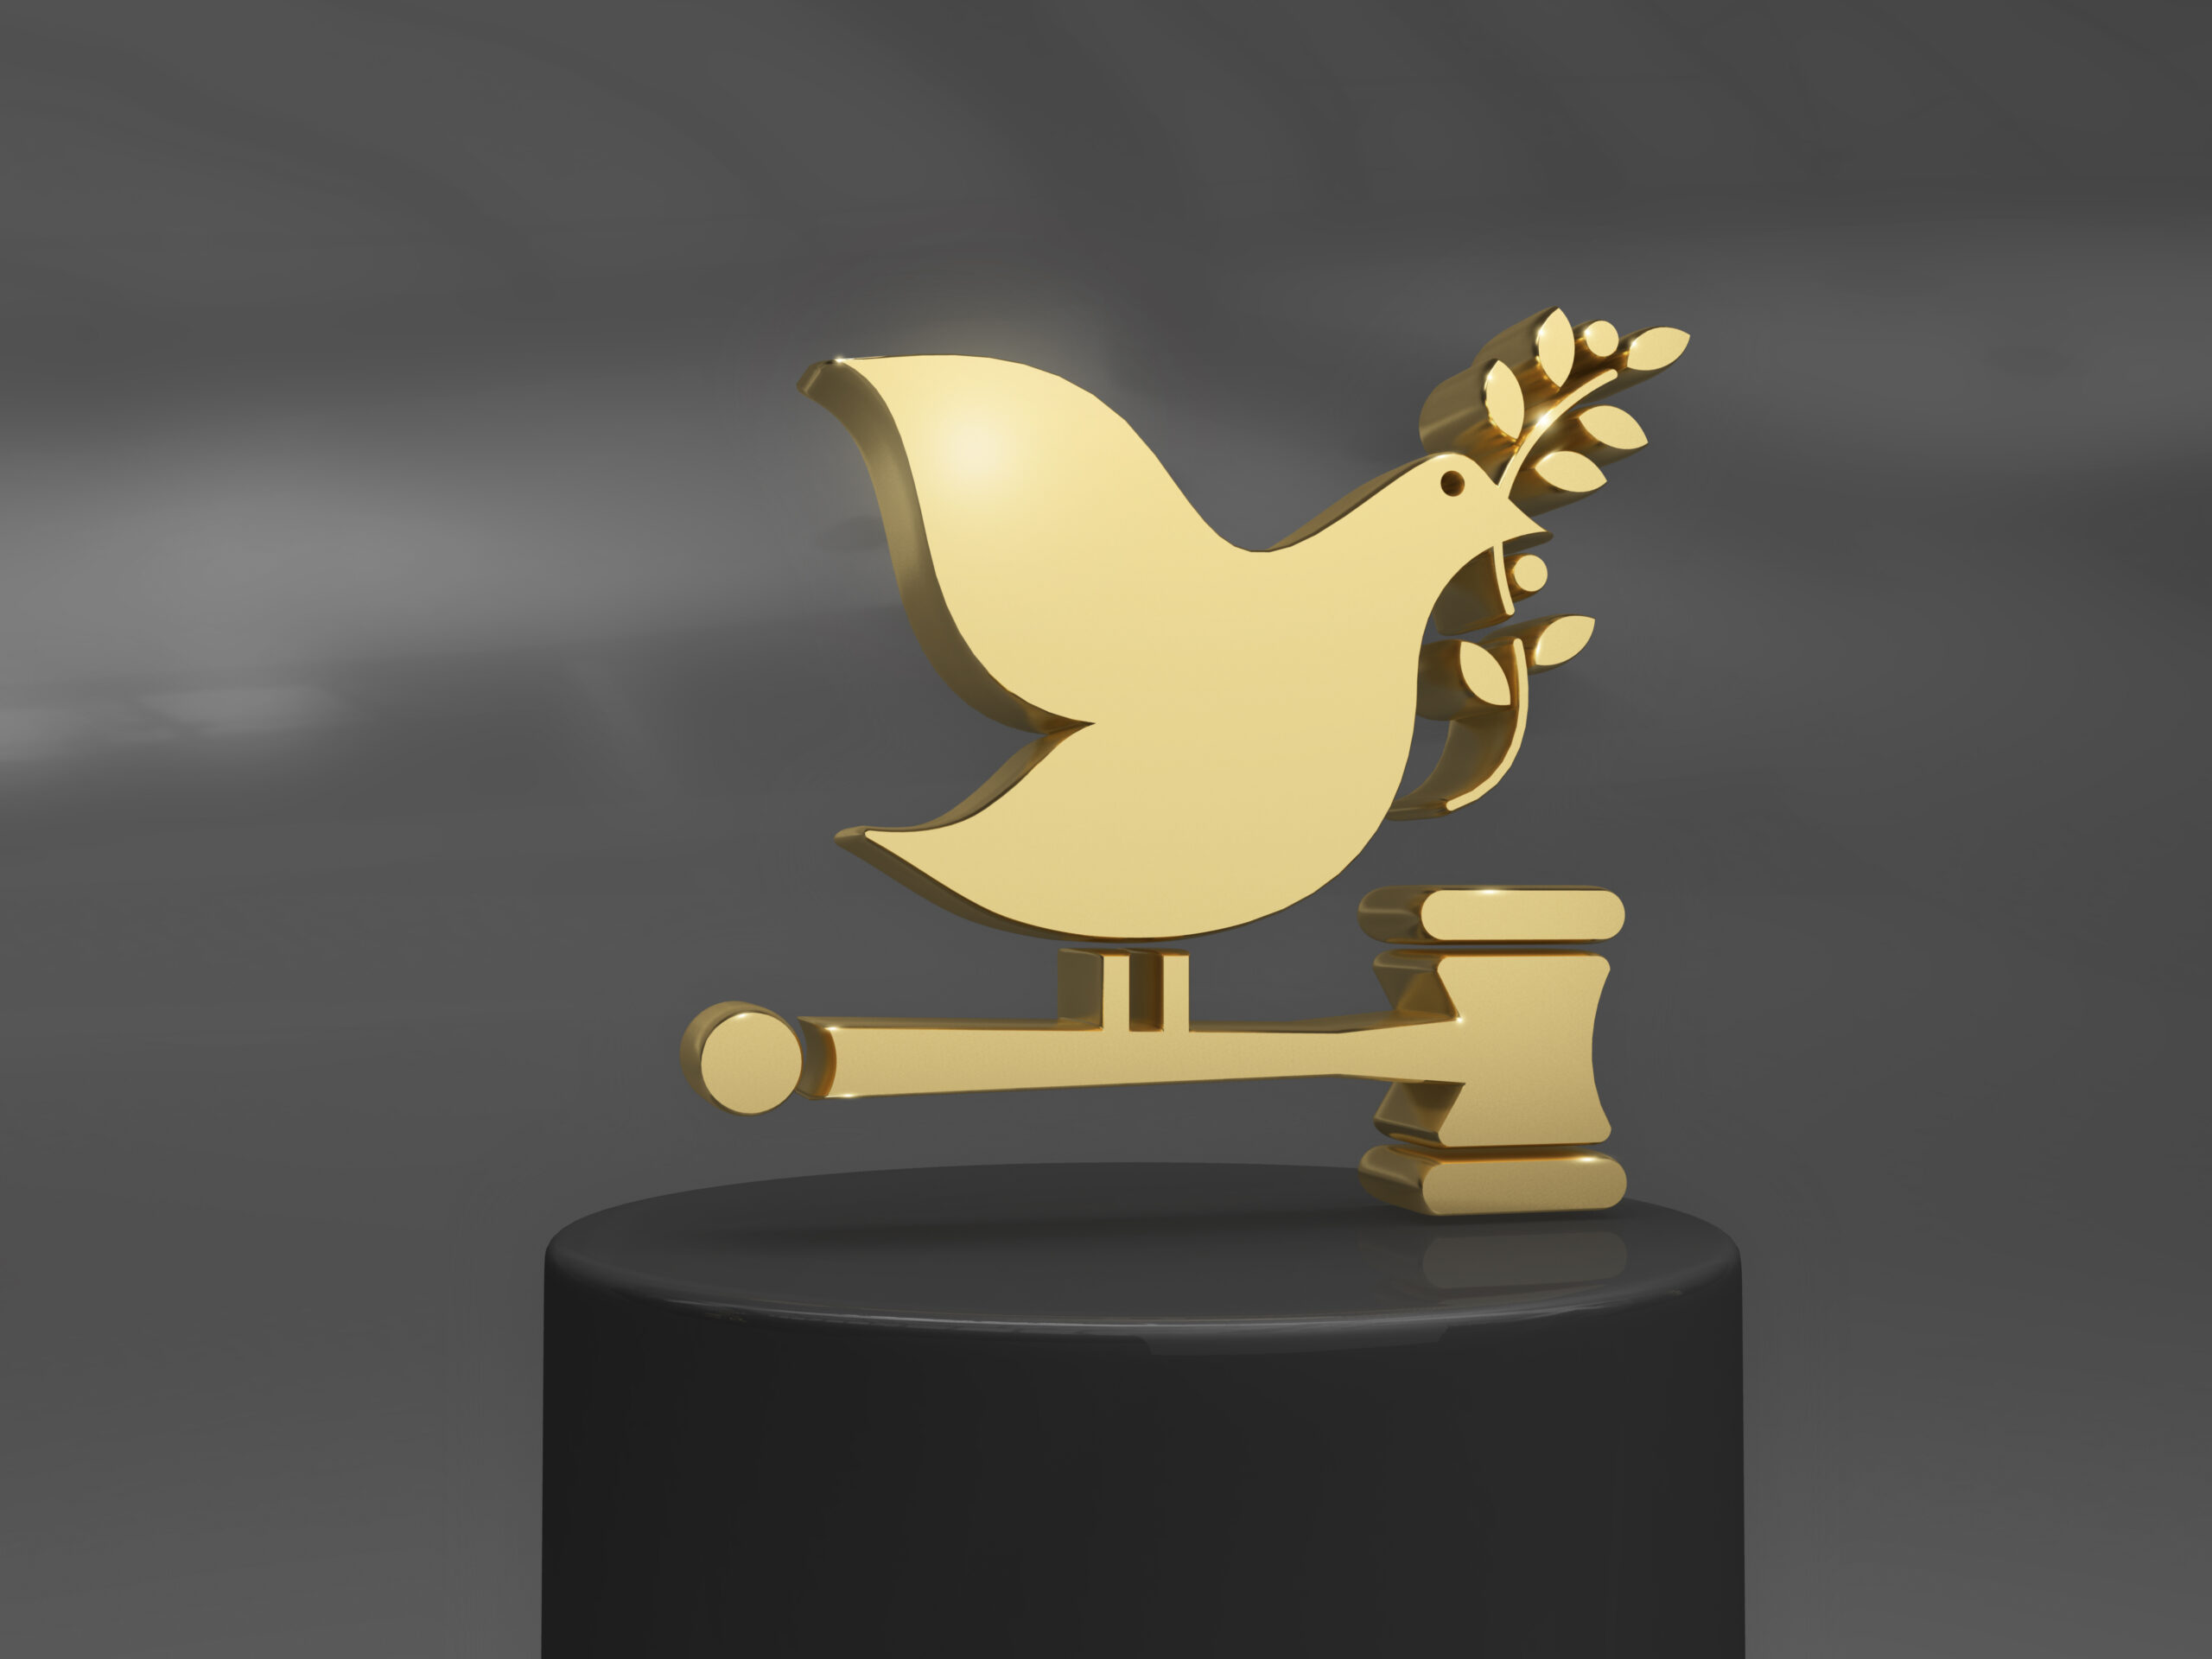 3D image of gold dove holding olive branch sitting on gavel above a stand